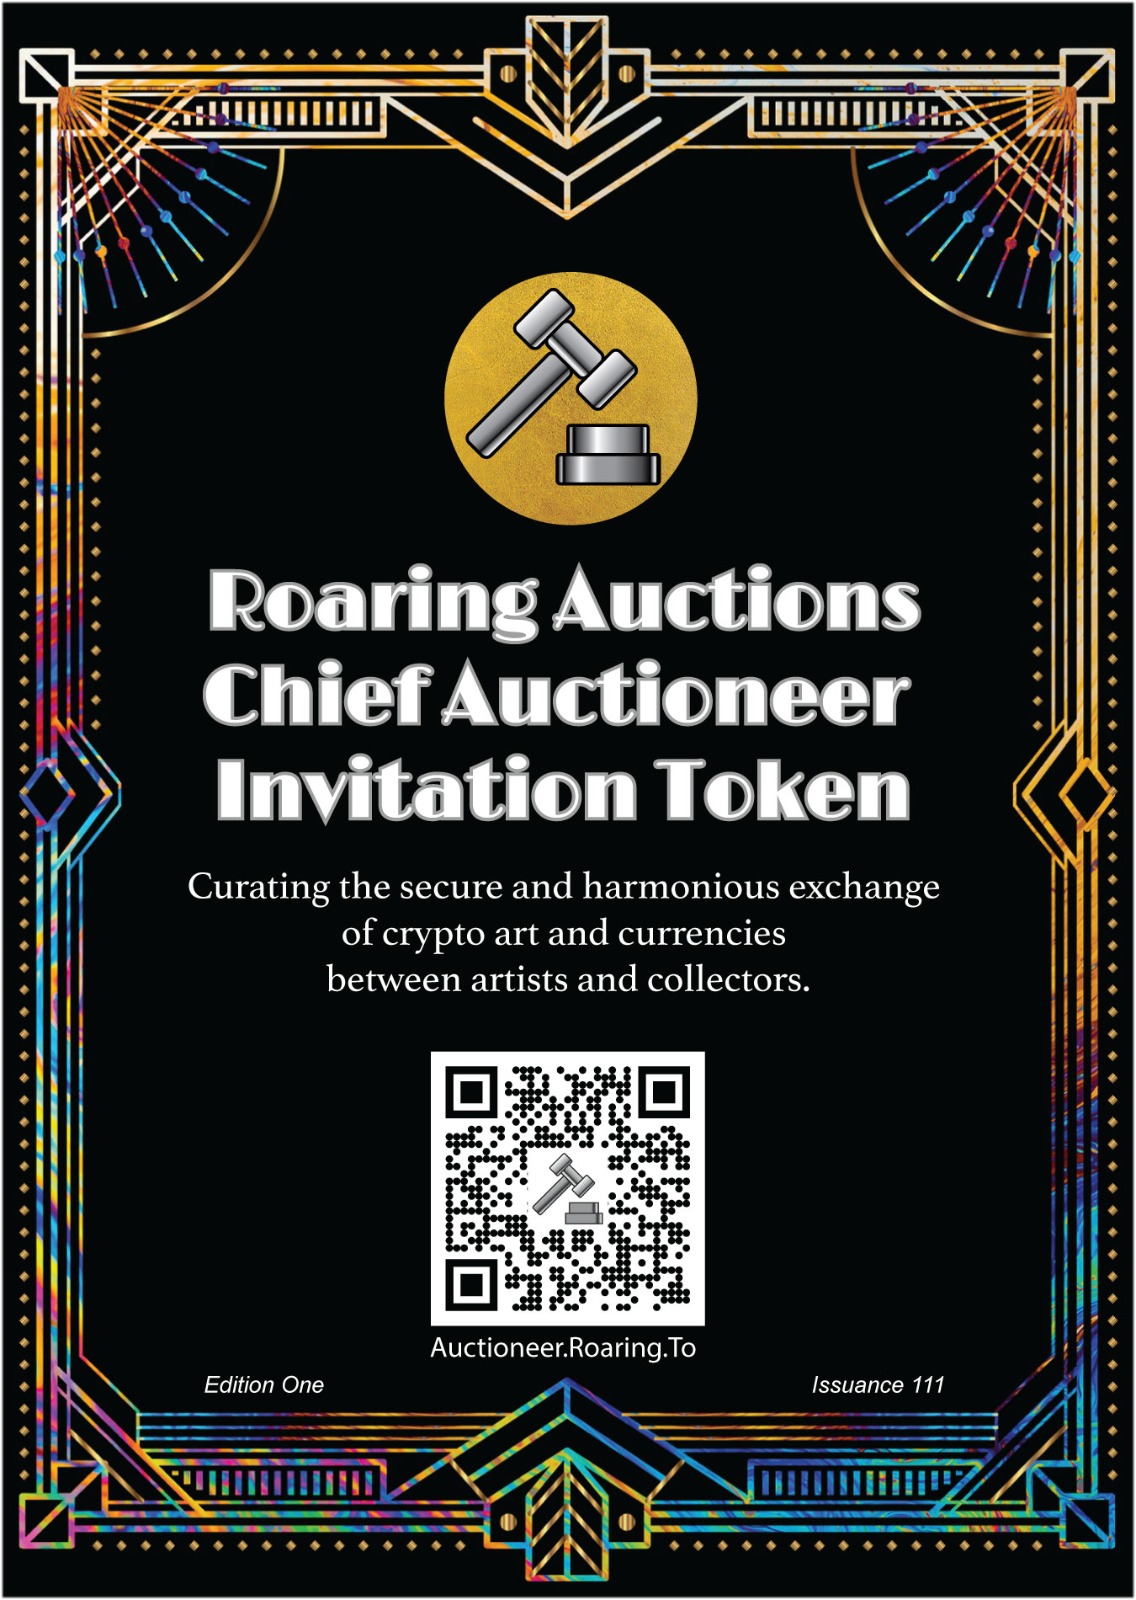 Roaring Auctions Chief Auctioneer Invitation Token